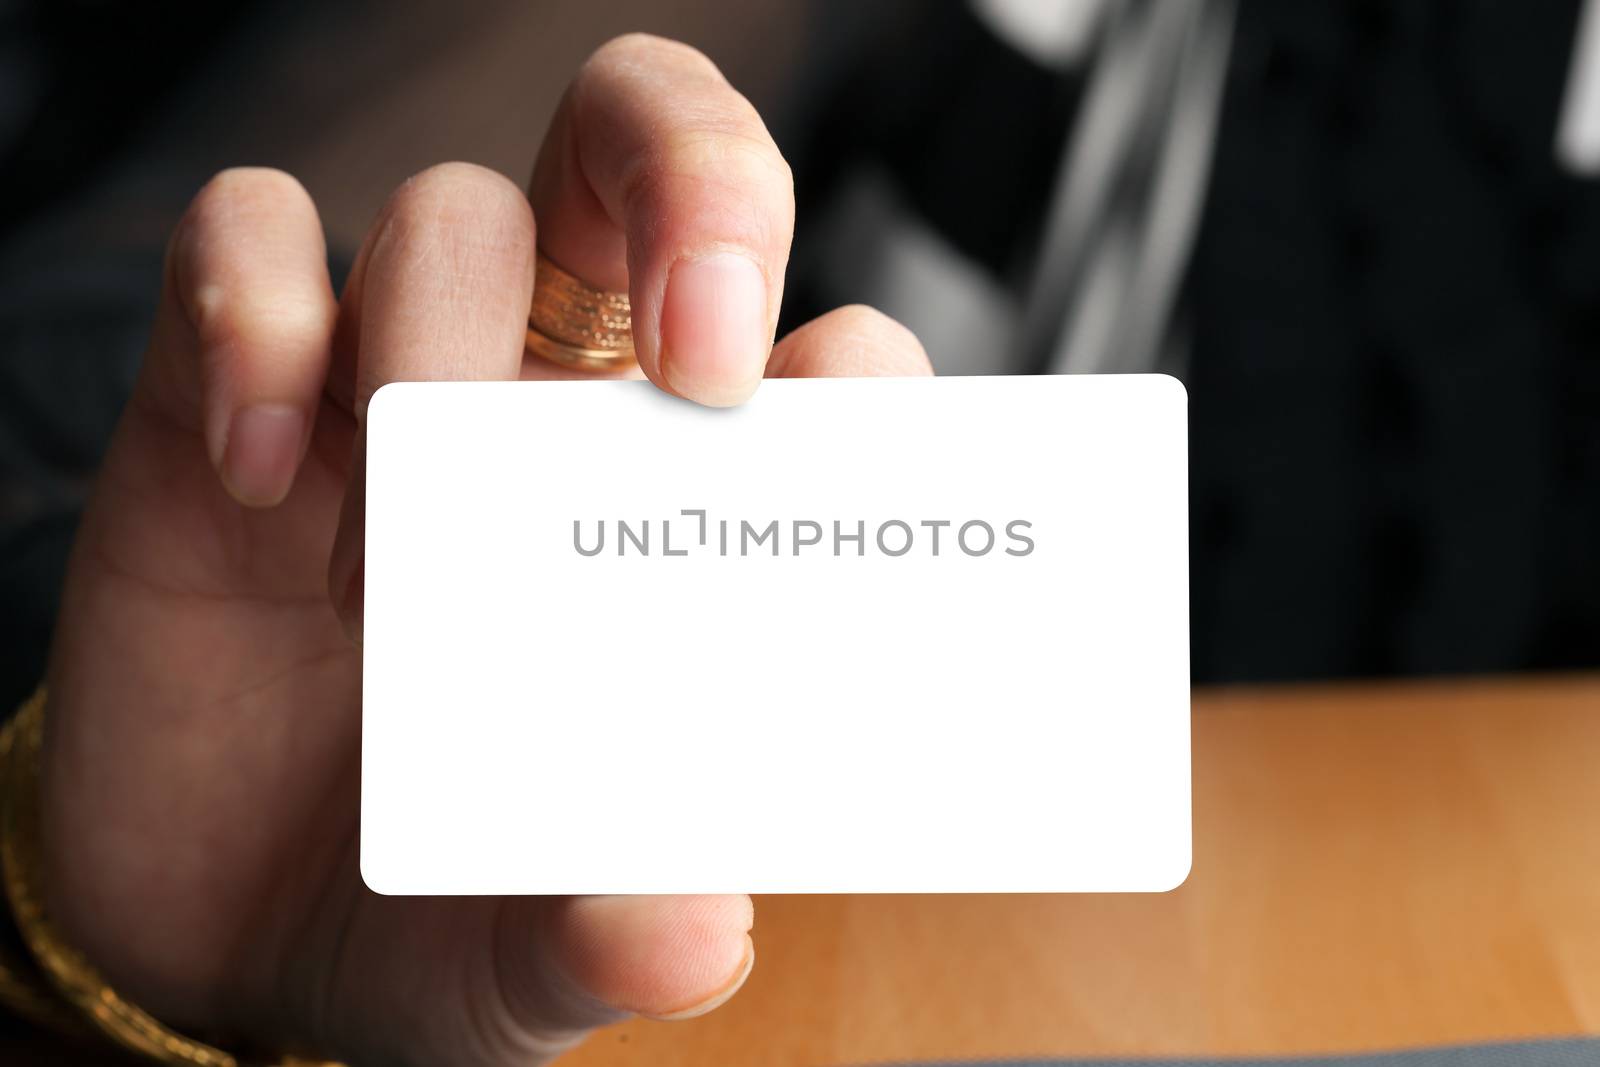 Female hand holding a blank business card gift card or credit card.  Plenty of copyspace for your logo or design.